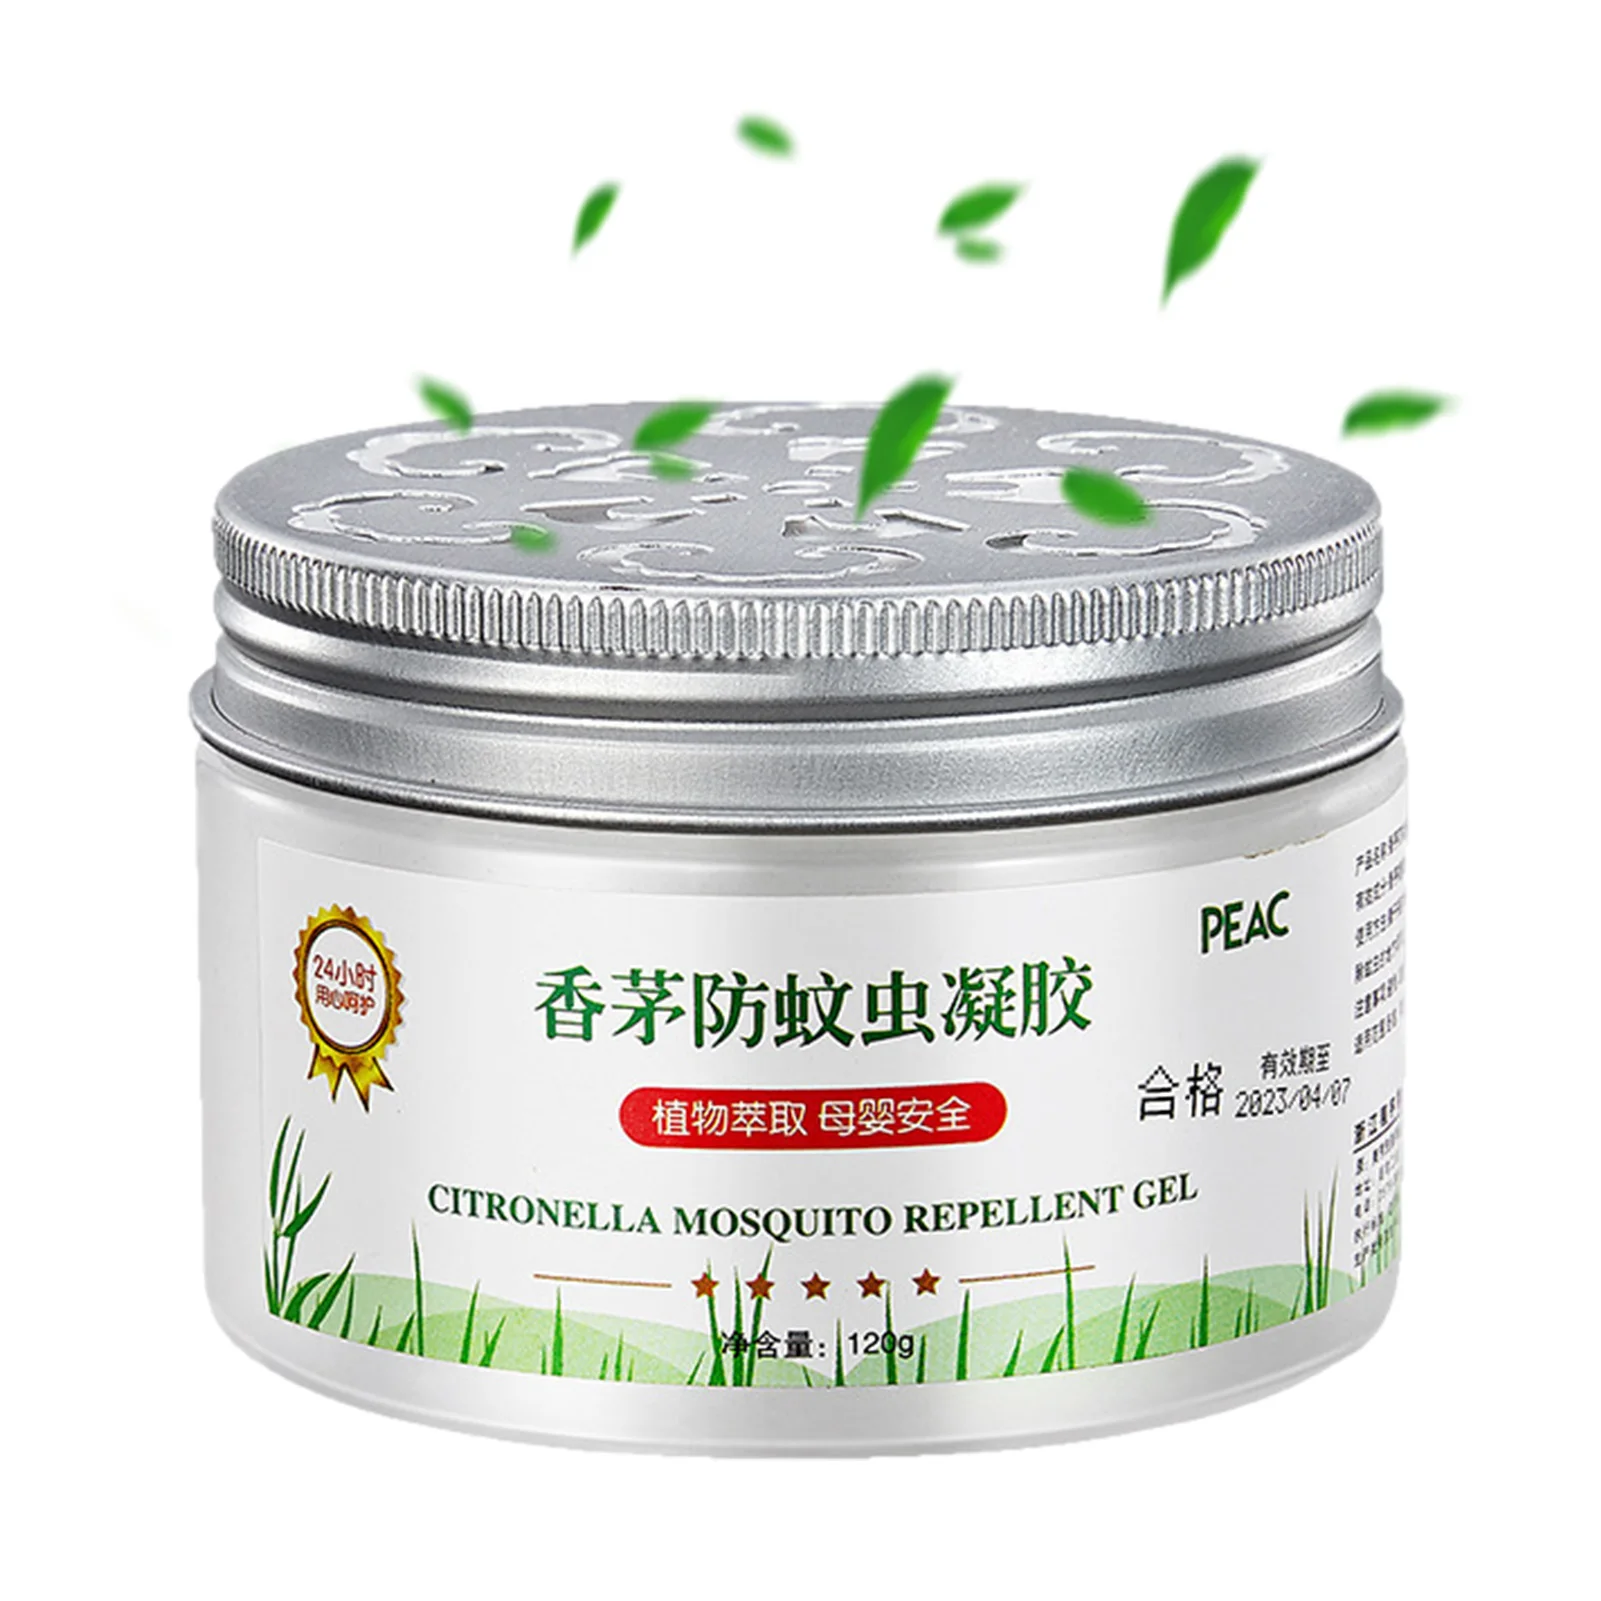 

Insect-resist Agents Bugs Repelling Gel Plant Extract Anti-Bugs Balm Mild and Safe Formula for Cars Bedroom Kitchen Living Room